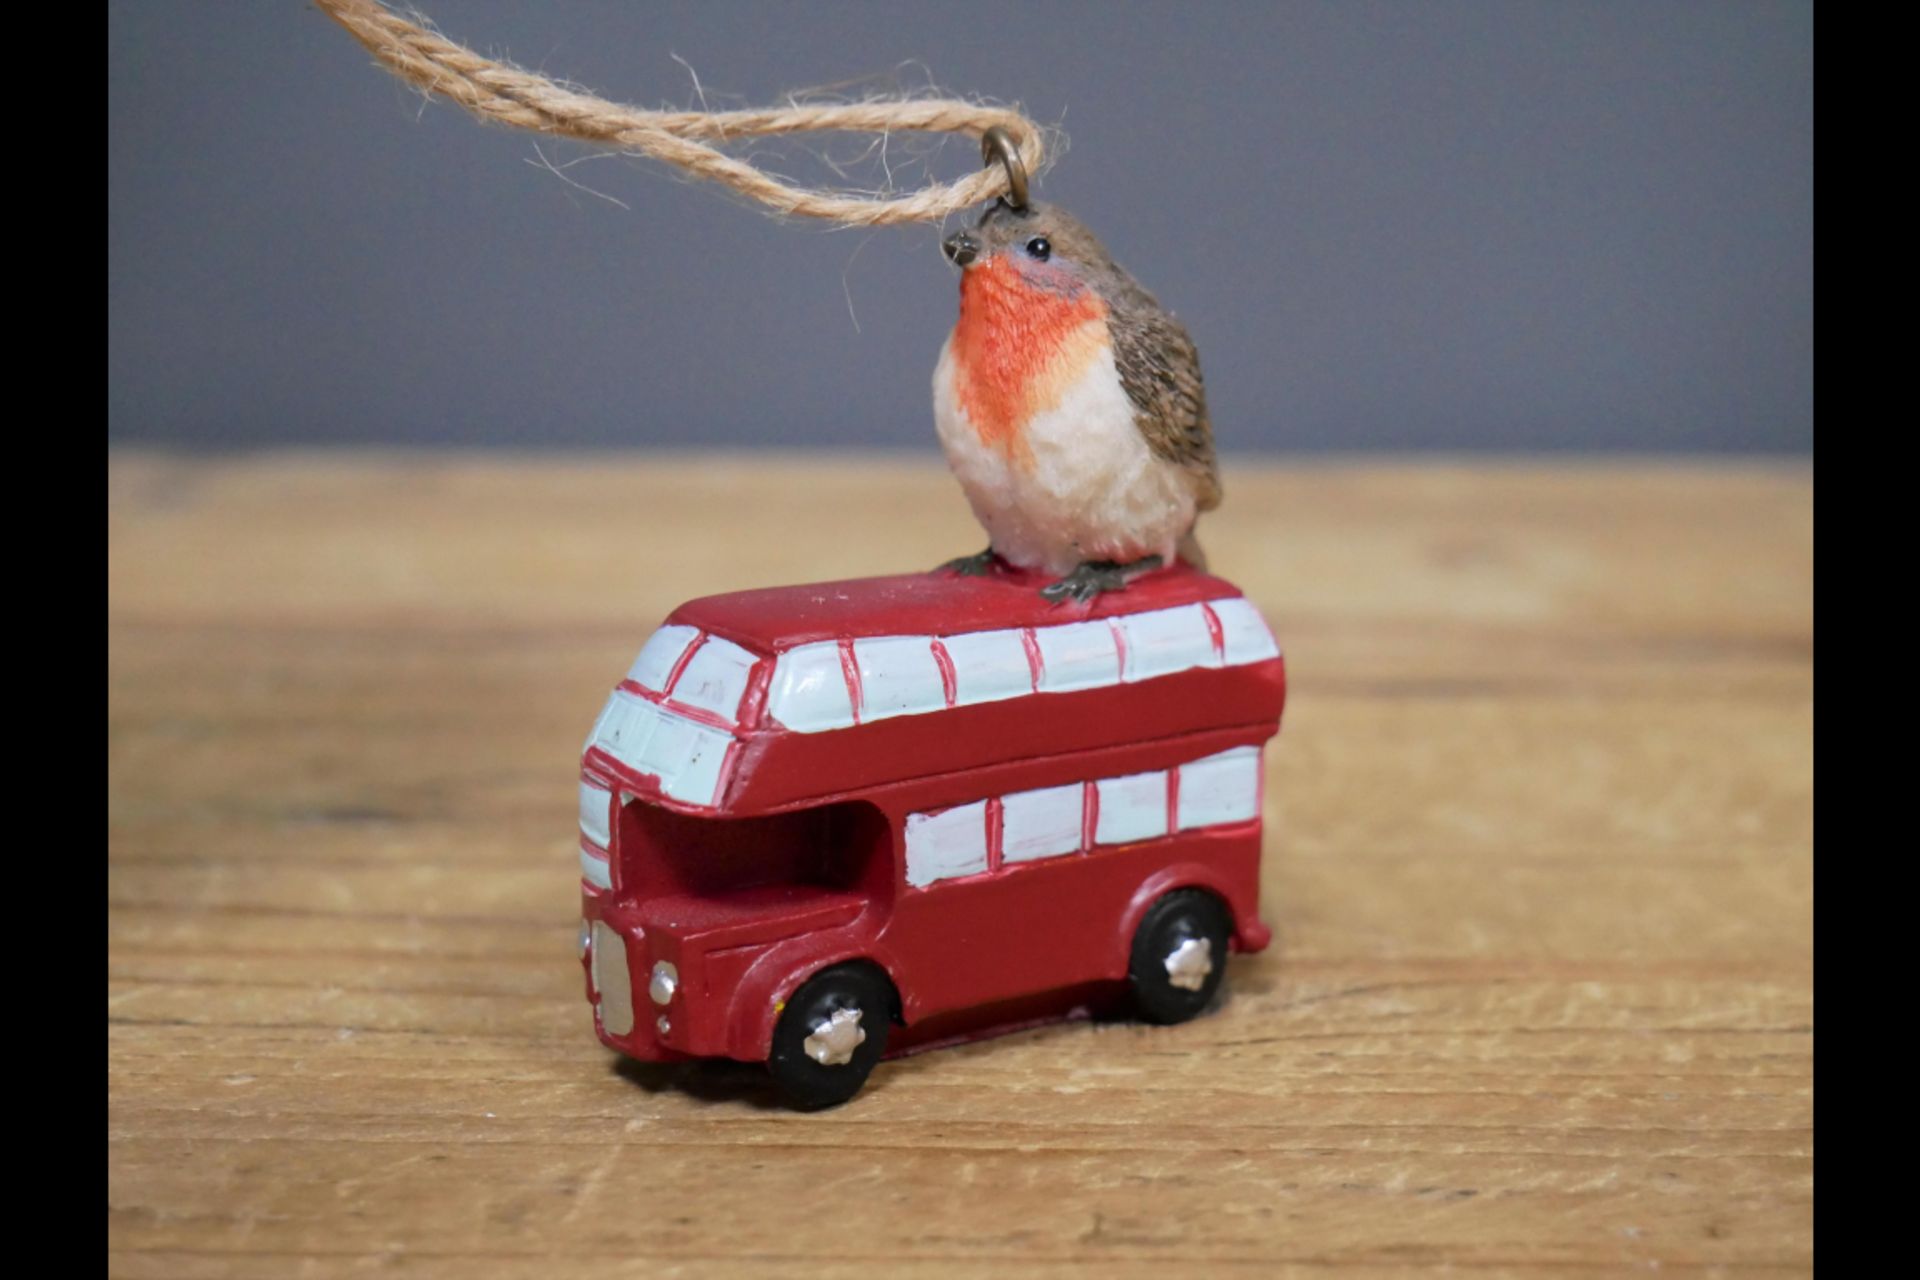 1x Robin on Red Bus Hanging Ornament - Image 2 of 3